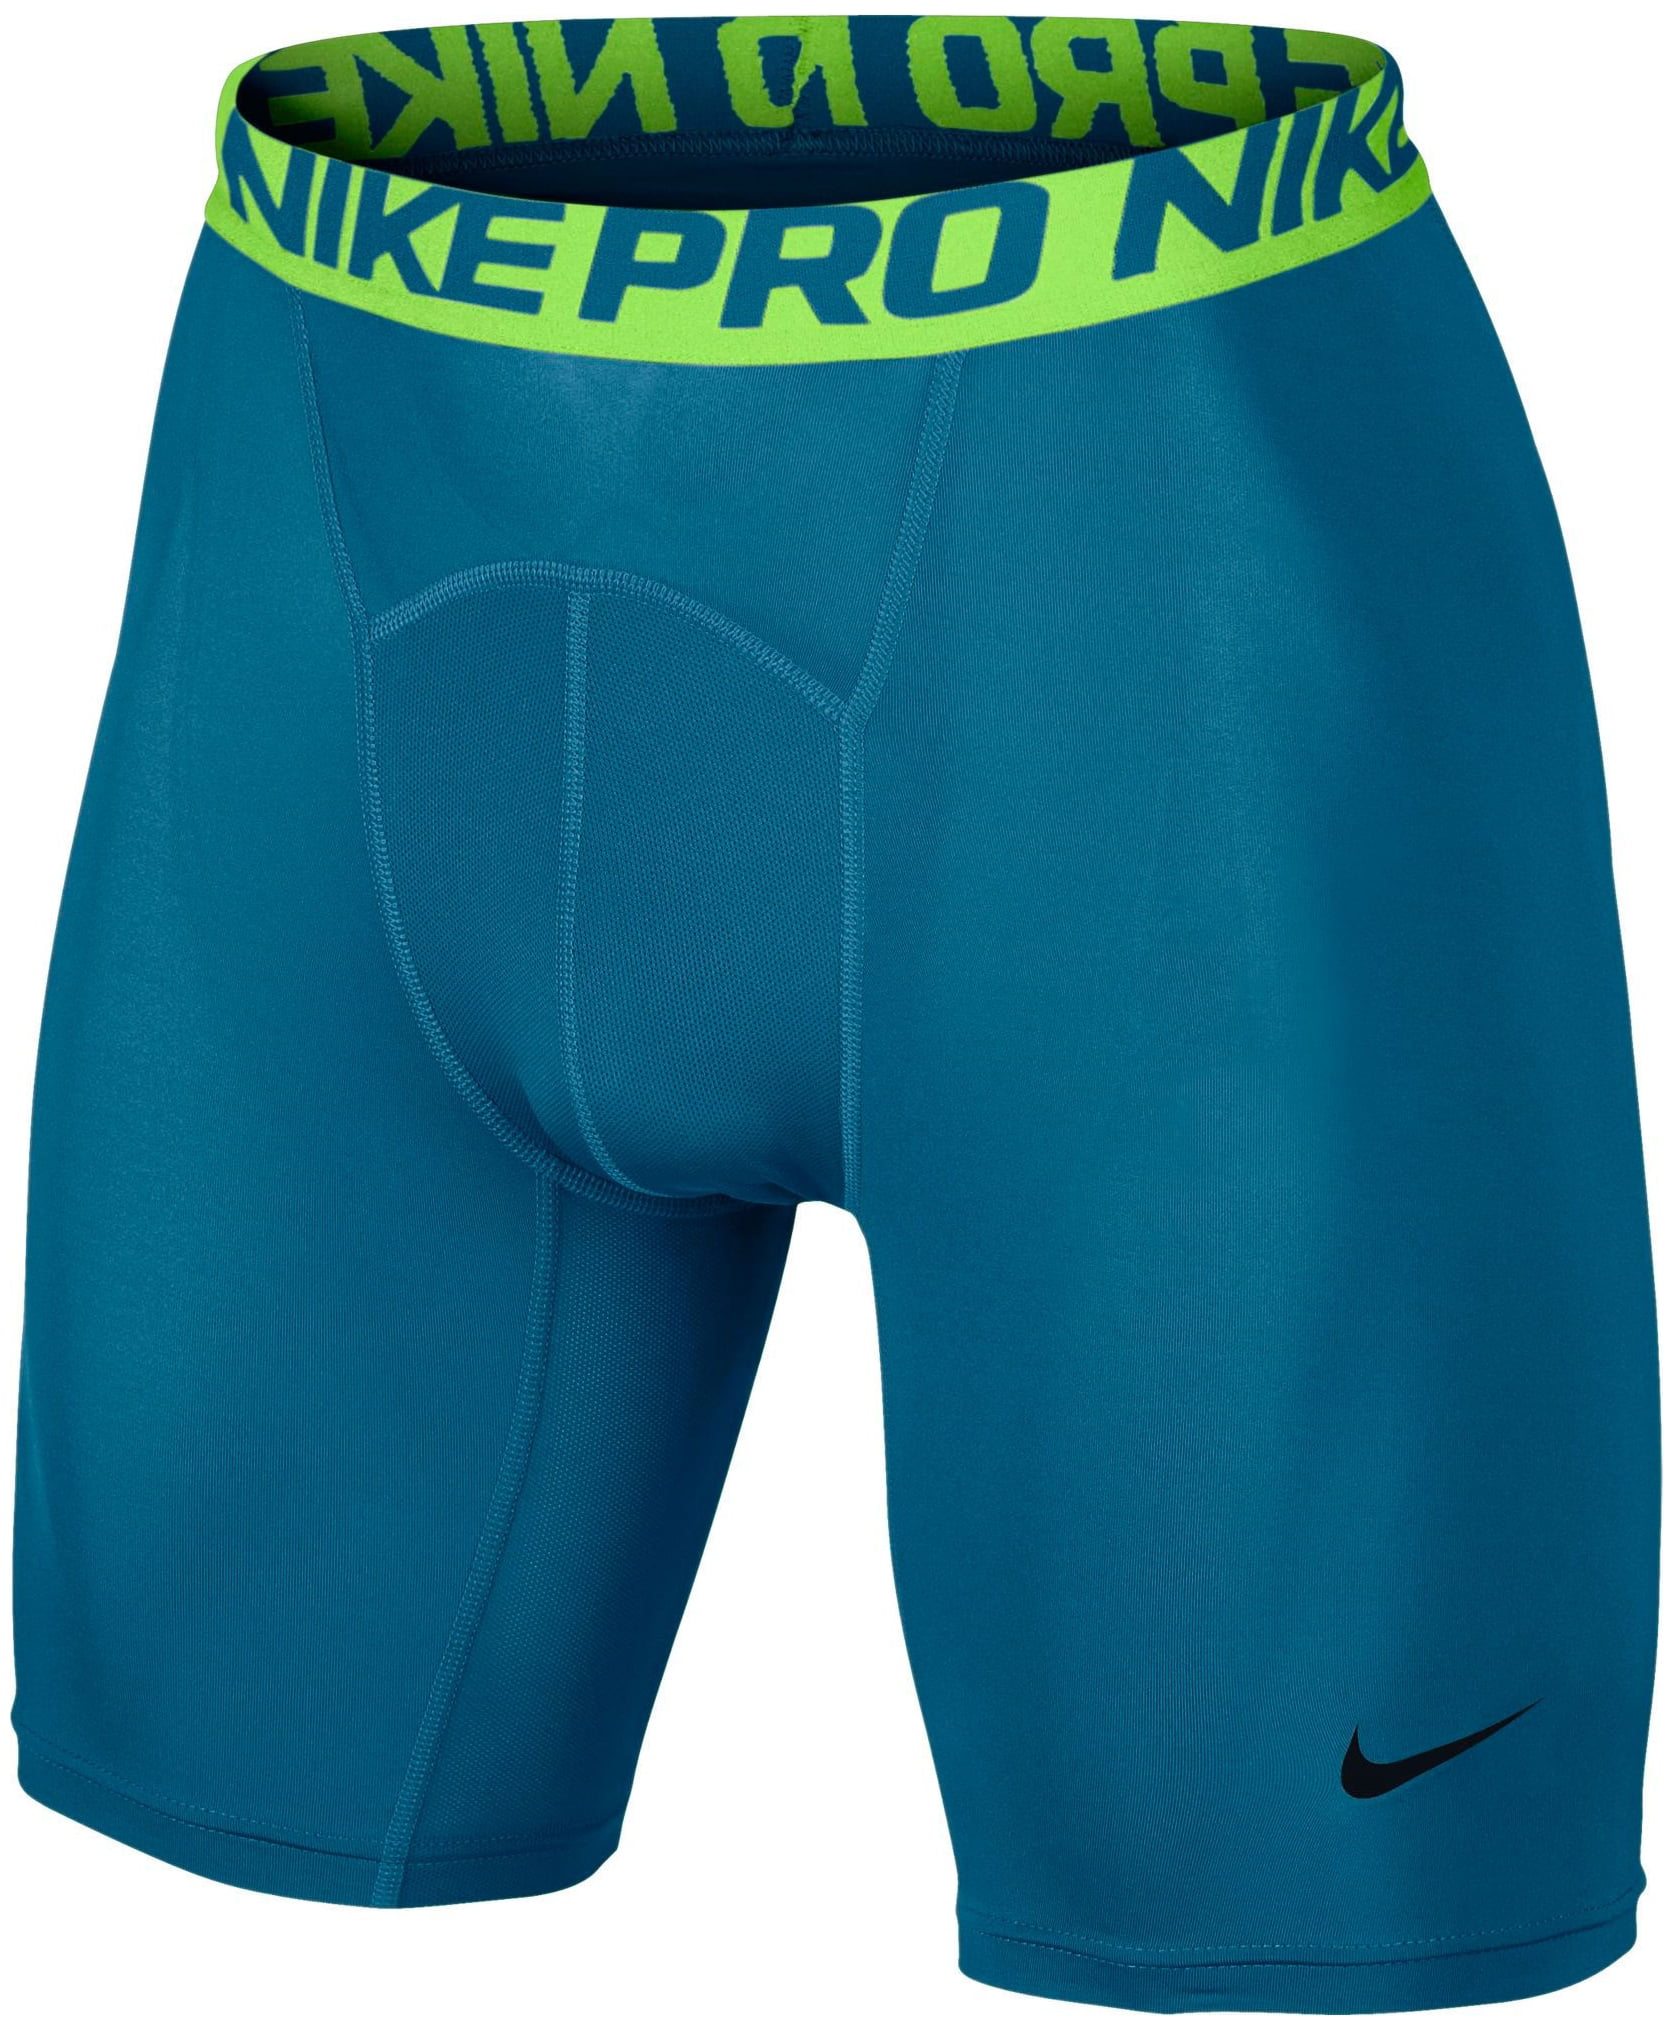 Nike Pro Cool 3 Volleyball Spandex from Aries Apparel $28